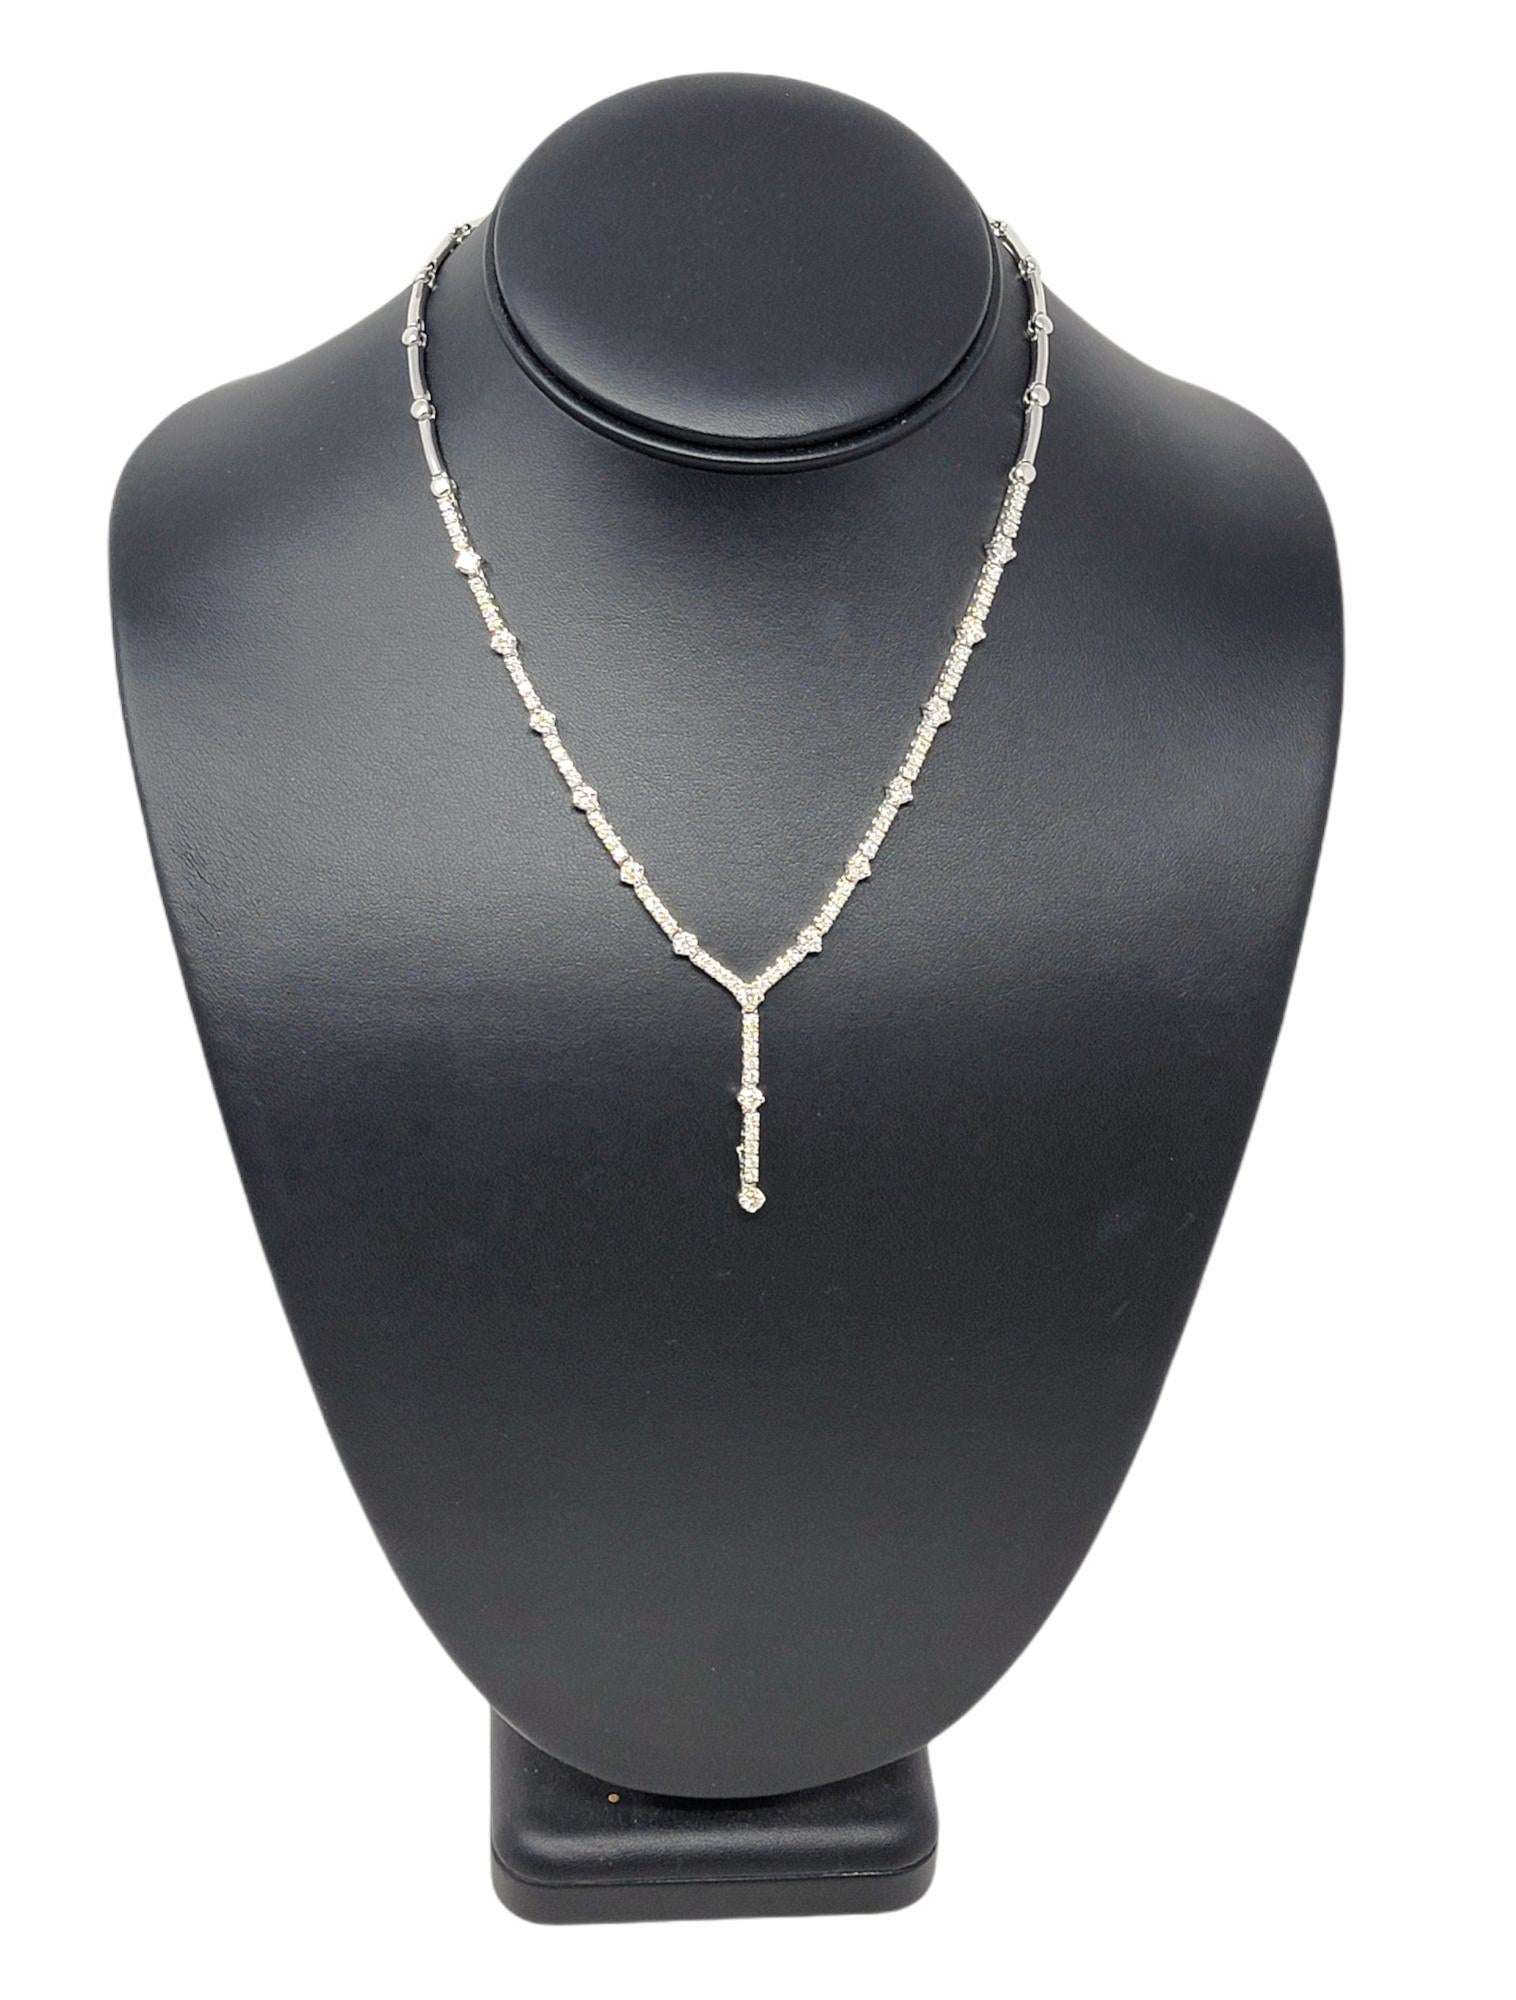 3.62 Carats Total Round Brilliant Diamond 'Y' Shaped Drop Necklace in White Gold For Sale 7